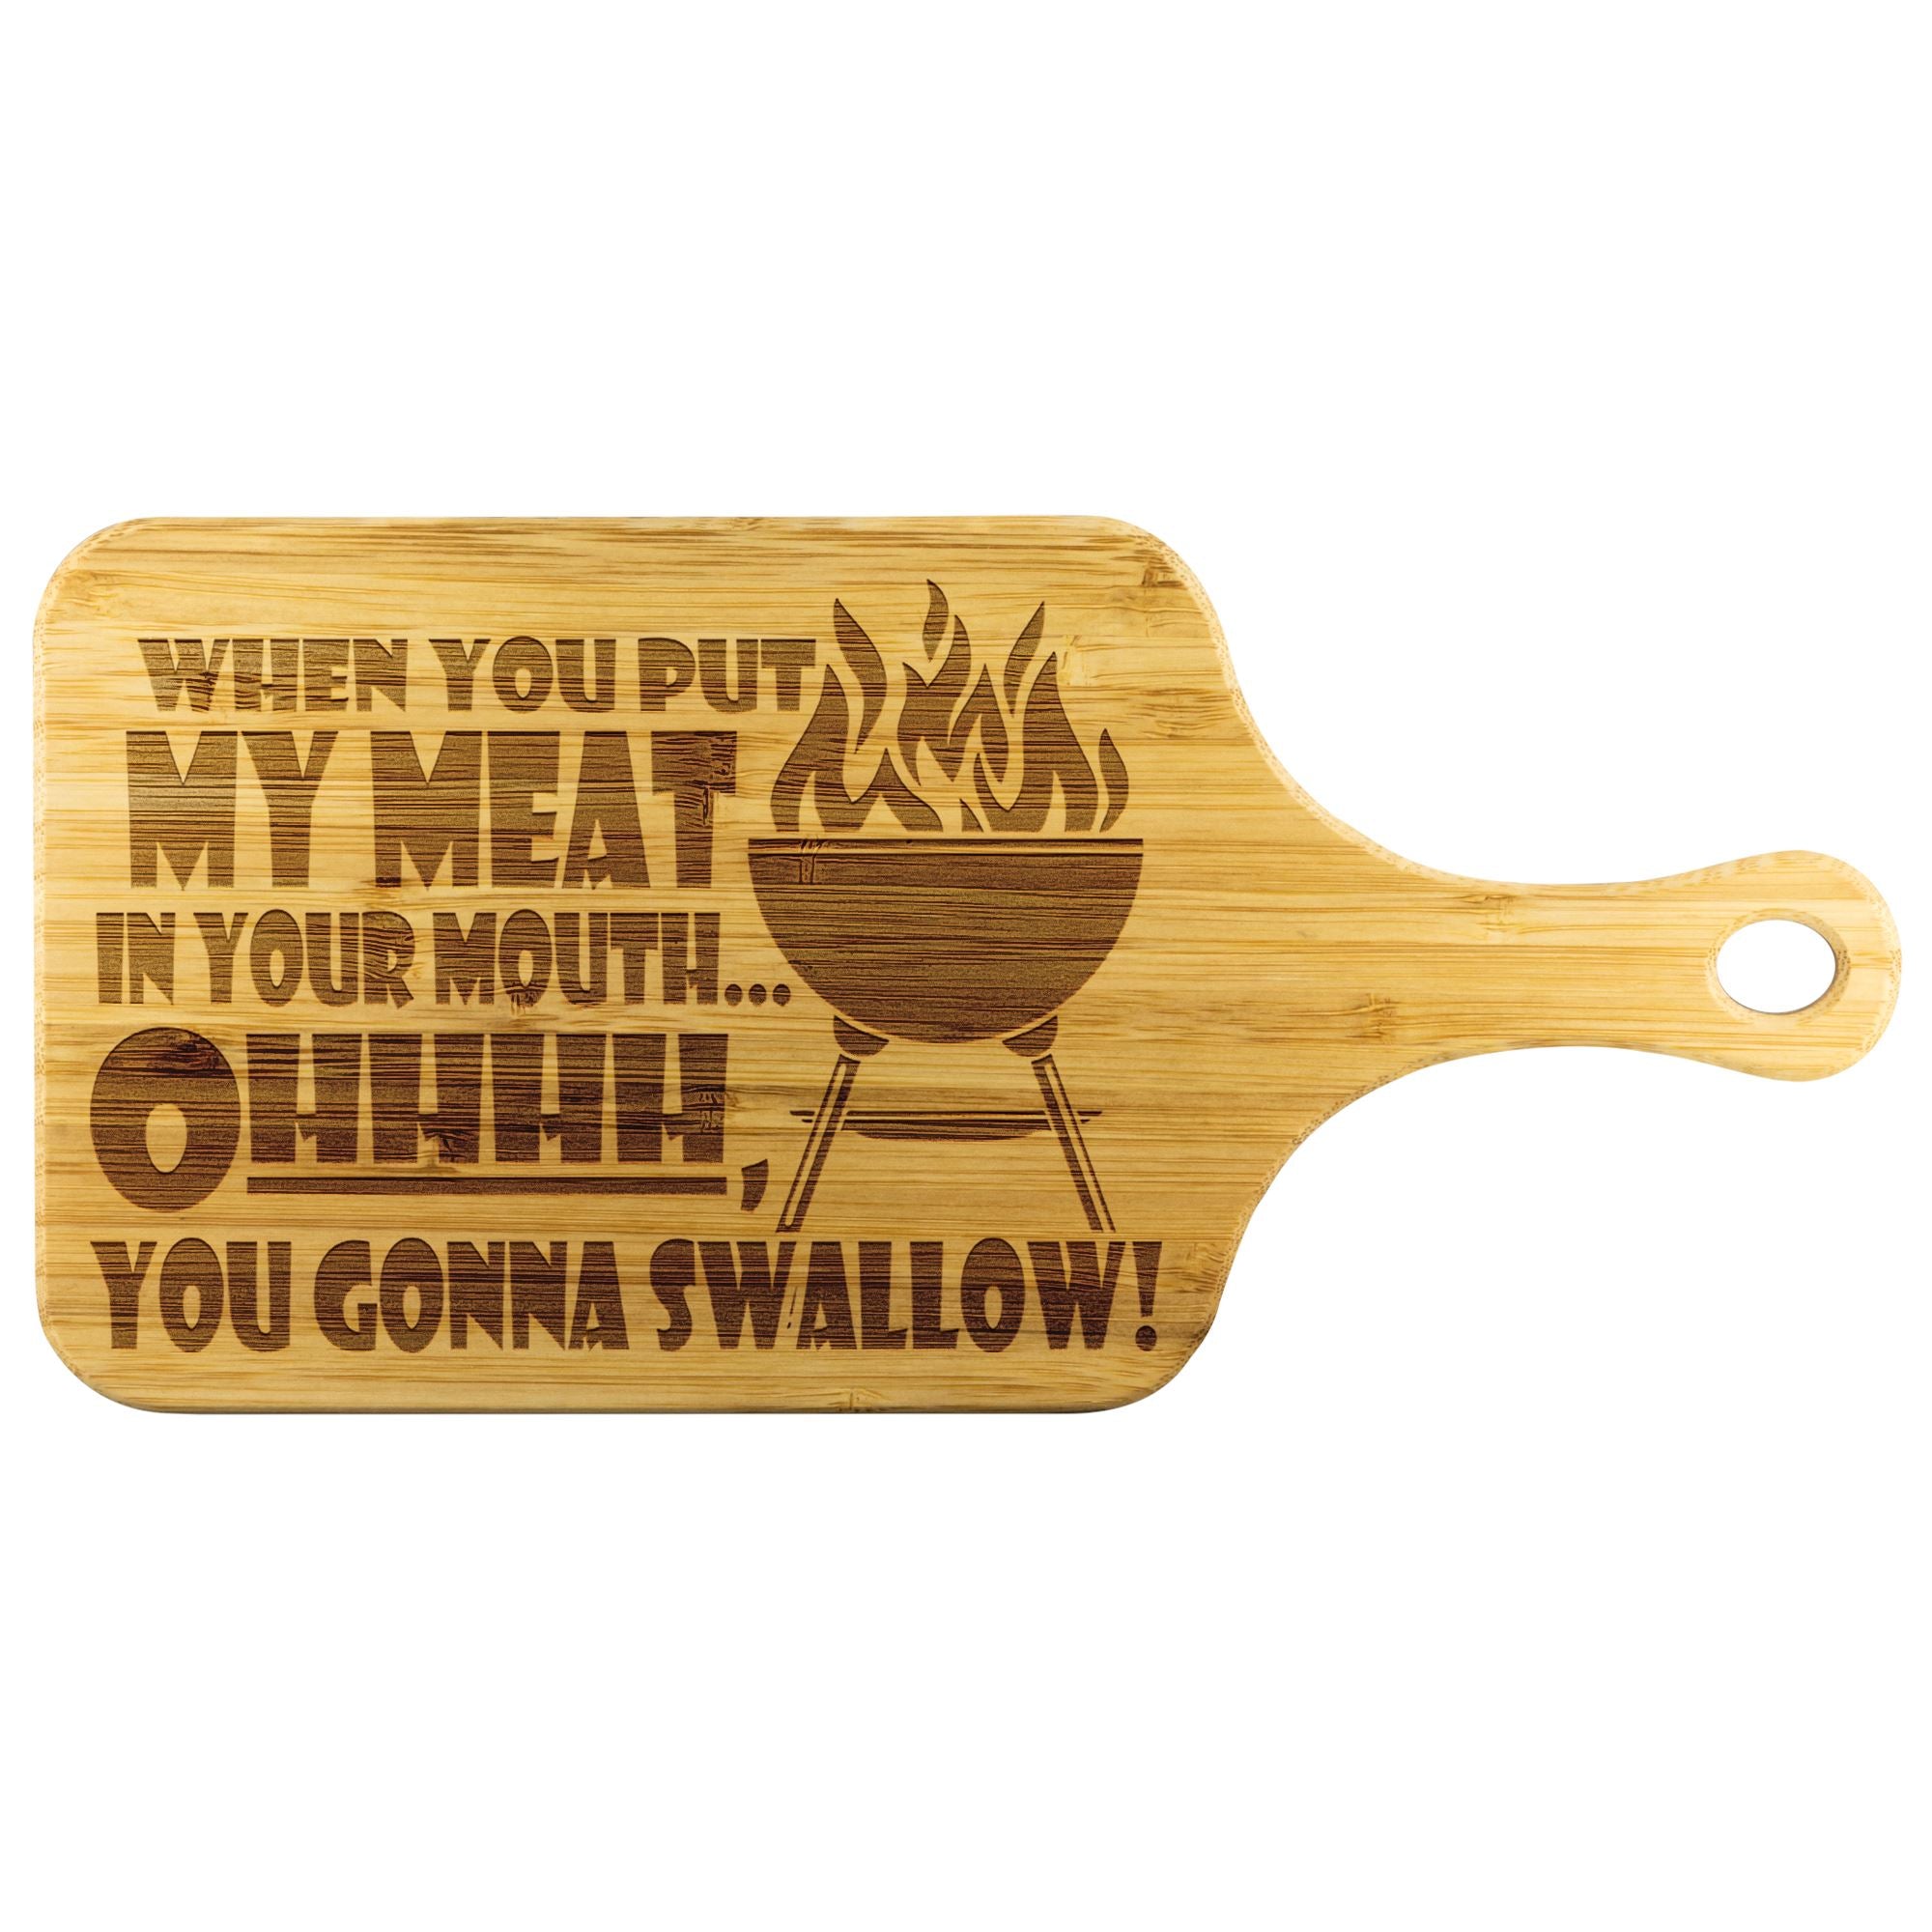 Grill Daddy Design on Cutting Board with white background